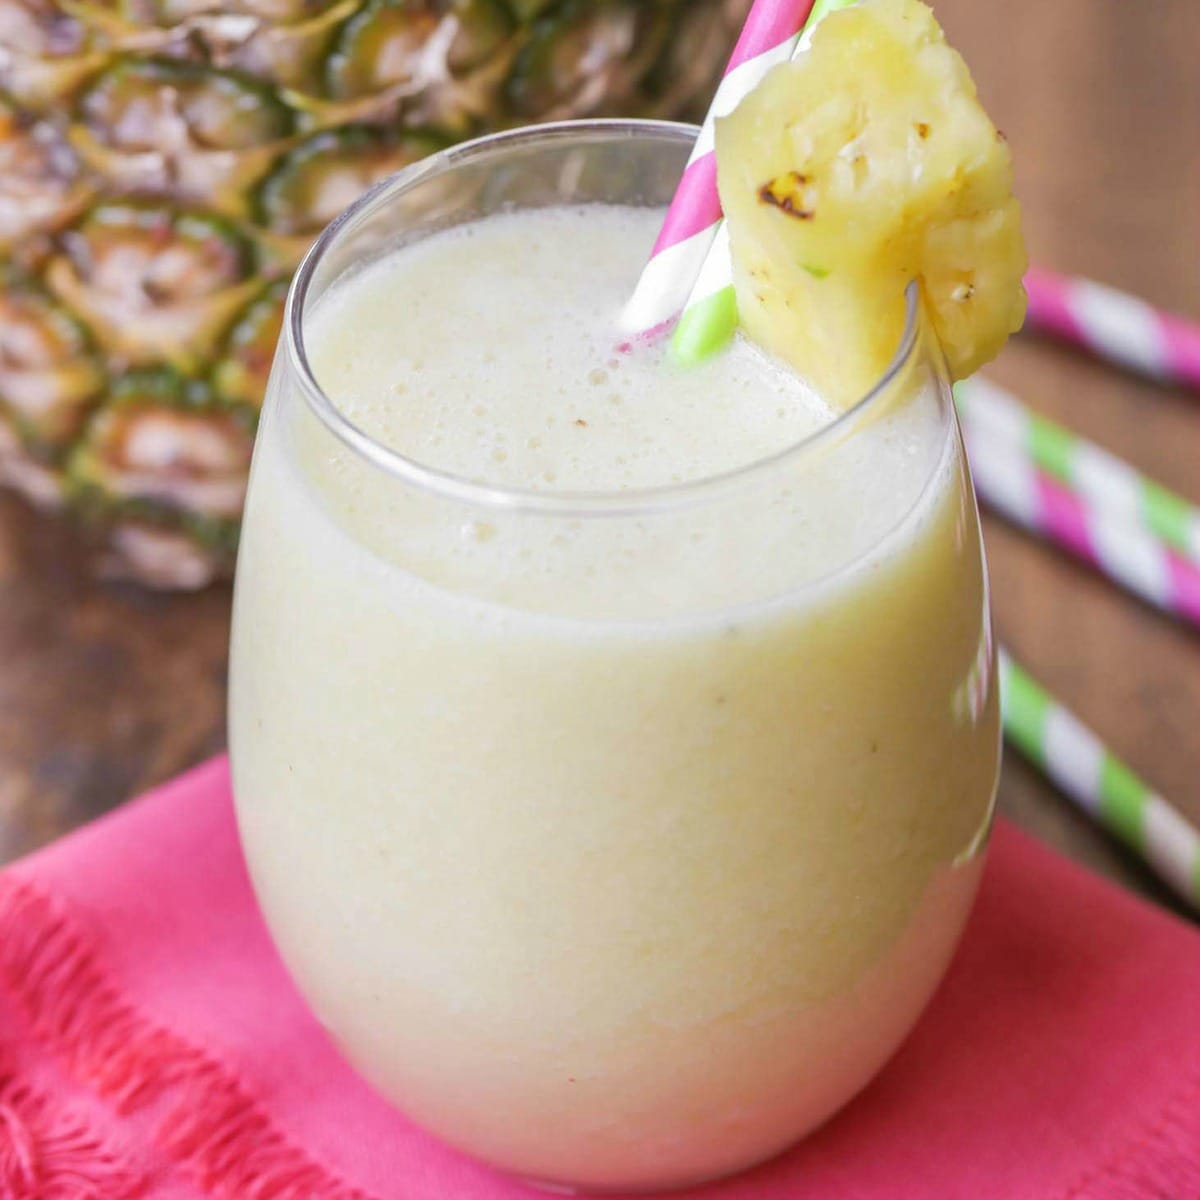 Short glass of Banana Smoothie with a pineapple garnish